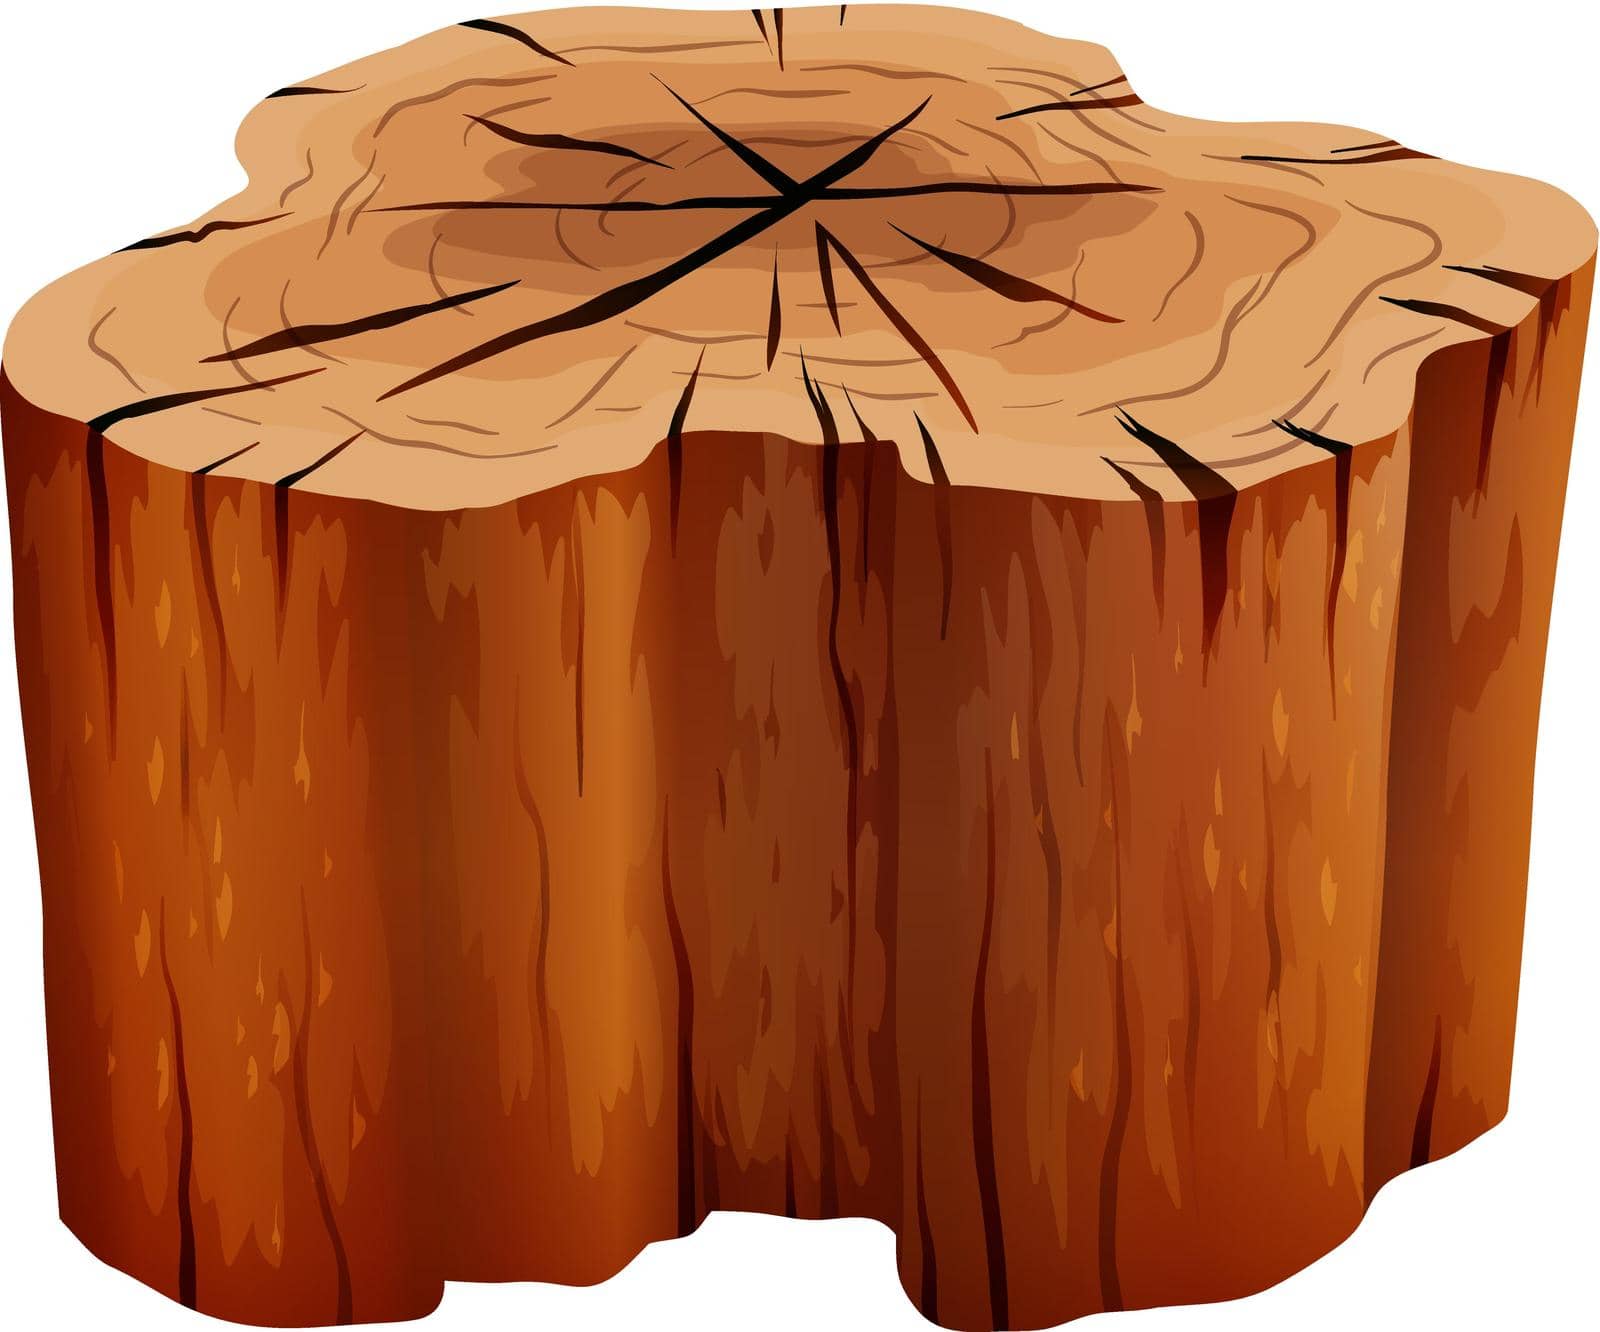 Illustration of a big stump on a white background